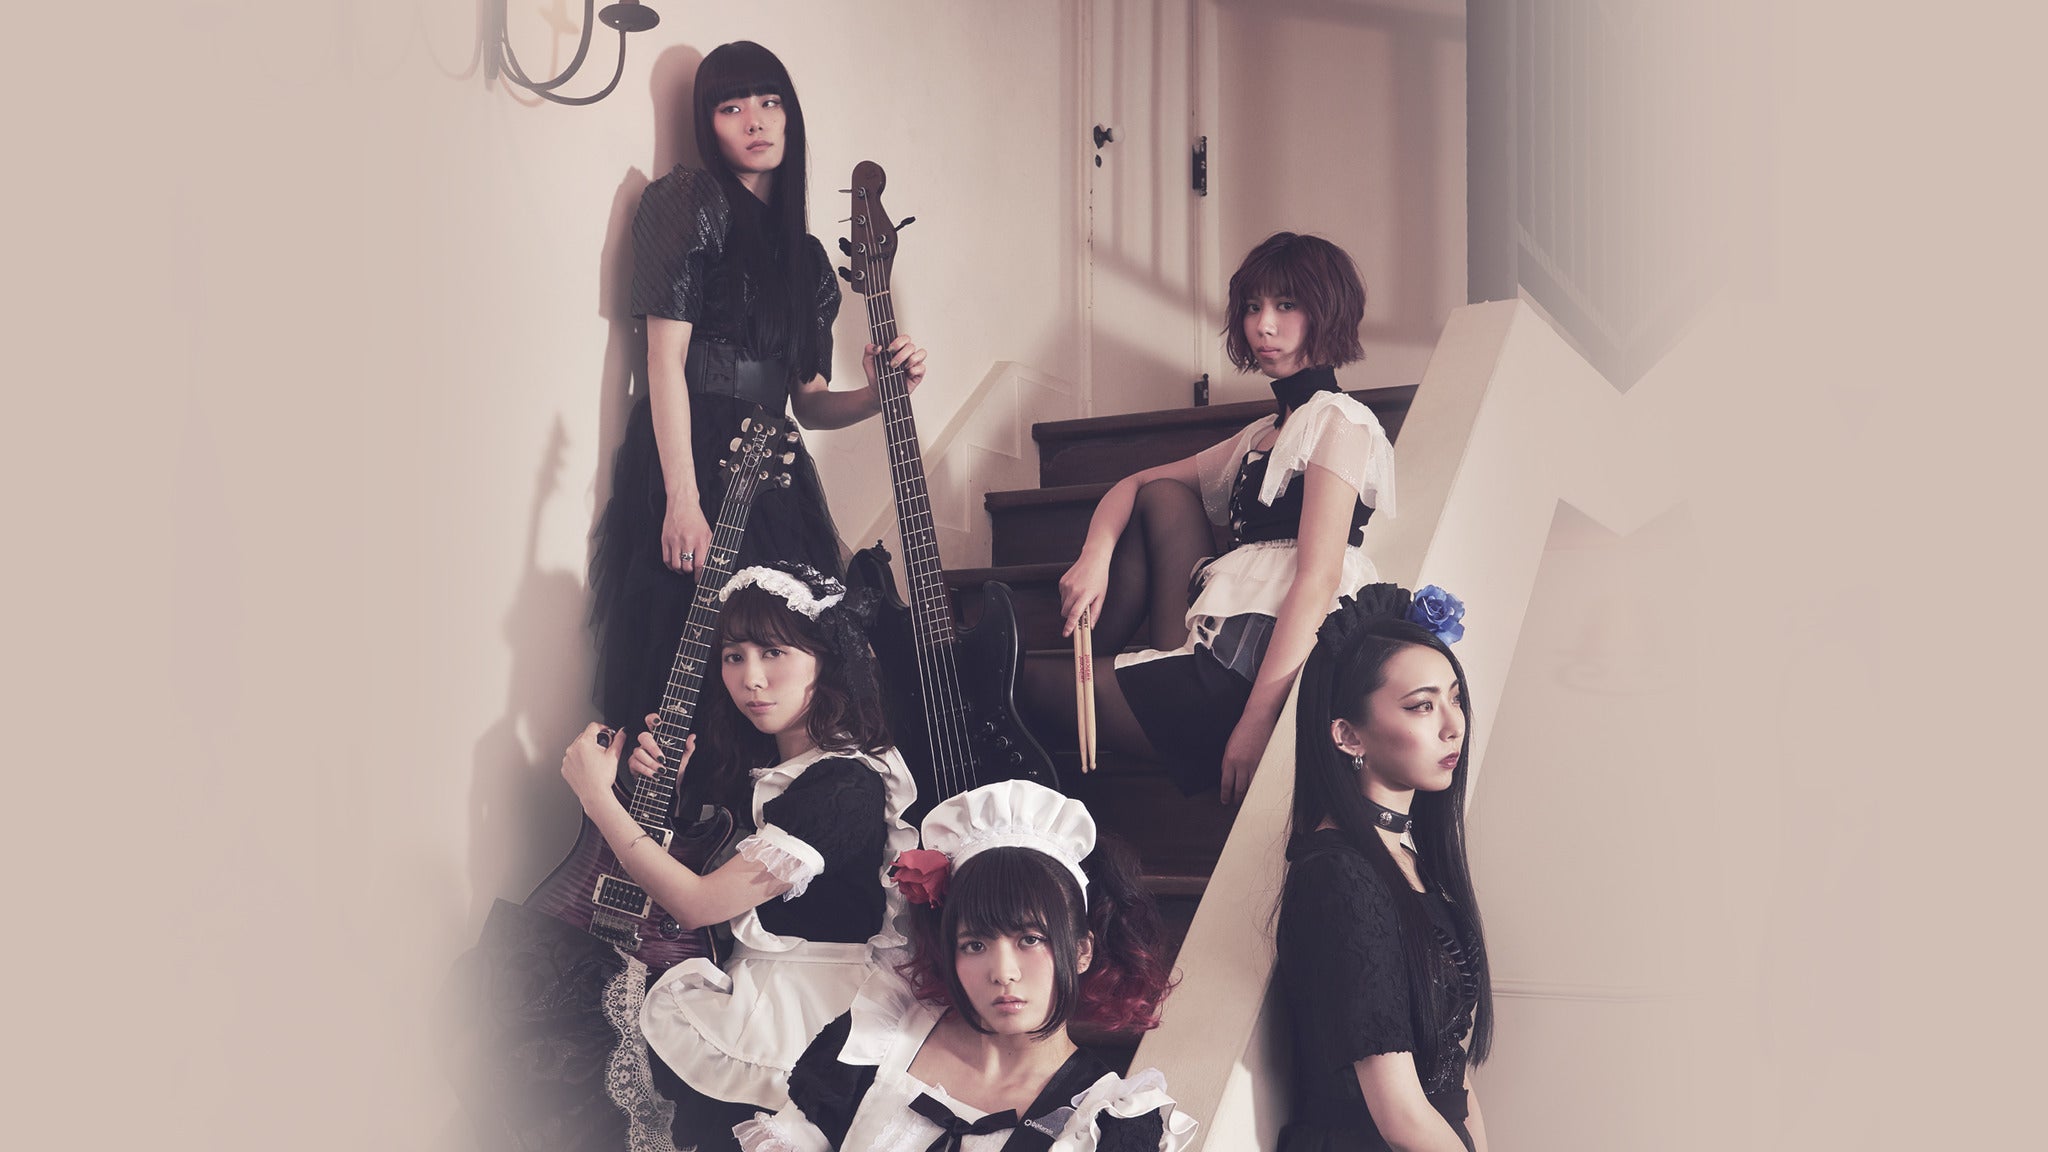 BAND-MAID WORLD DOMINATION TOUR 2019 ~gekidou~ in New York promo photo for Official Platinum Public Onsale presale offer code